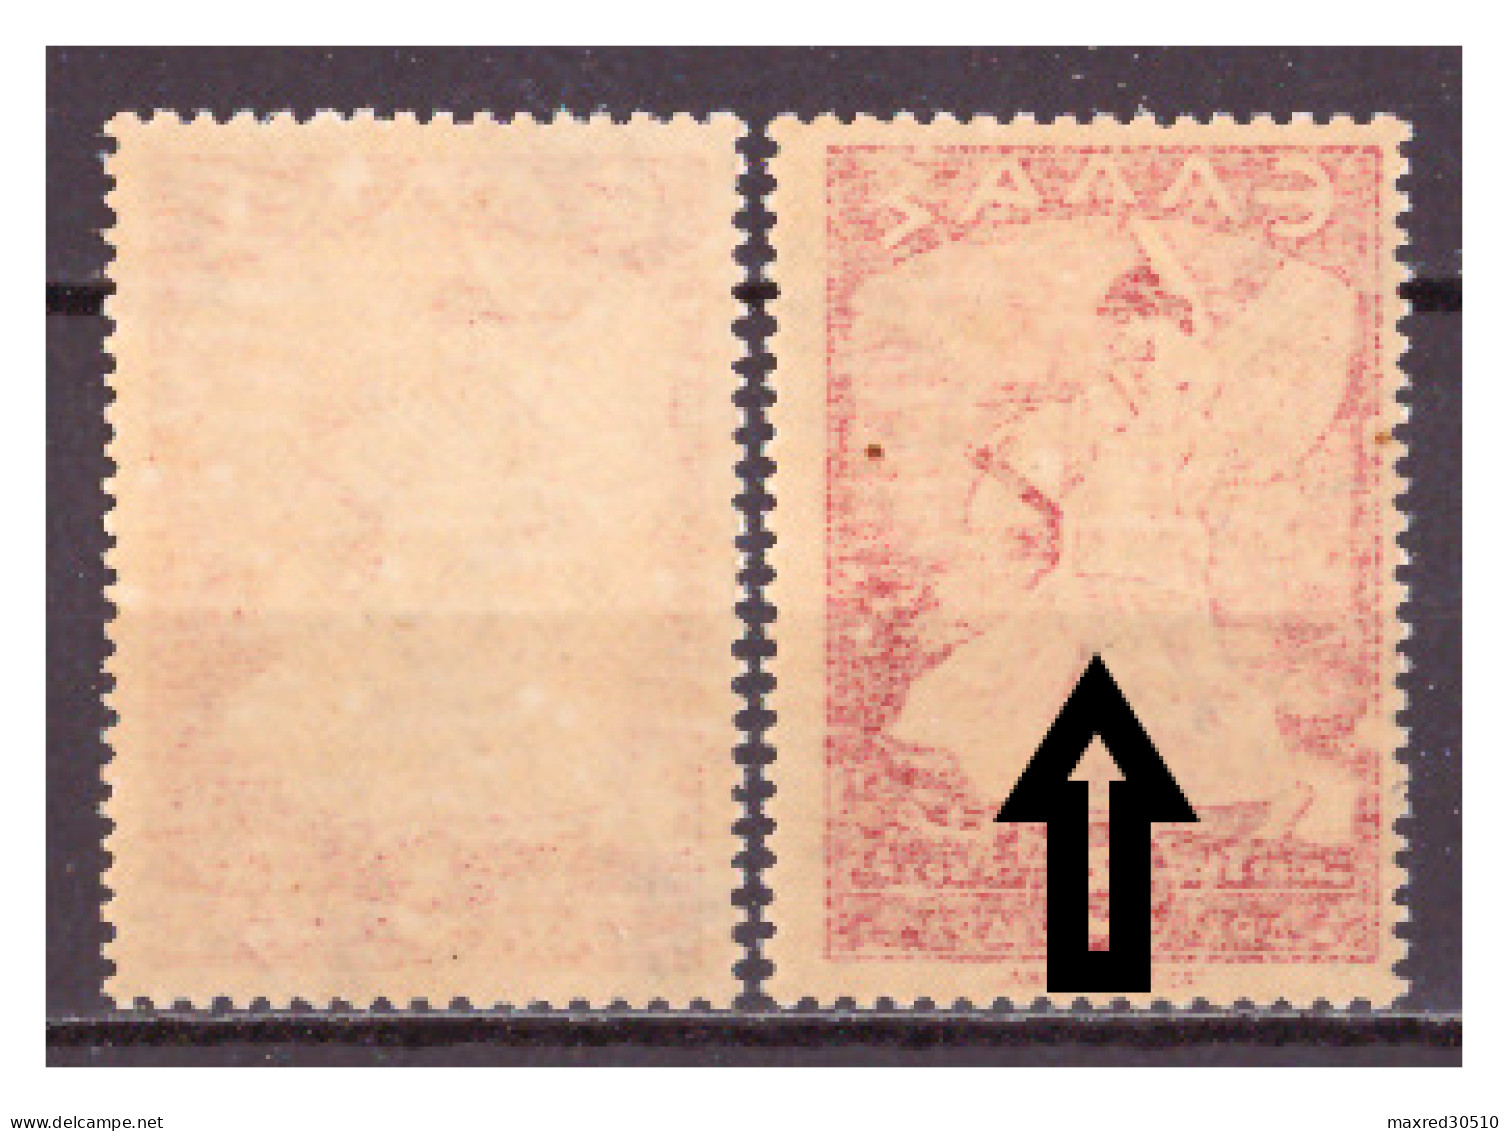 GREECE 1945 2X3L. OF THE "GLORY ISSUE" THE 2ND ONE (SEE ARROWS) WITH MIRROR PRINTING AT THE GUM ERROR MNH - Varietà & Curiosità